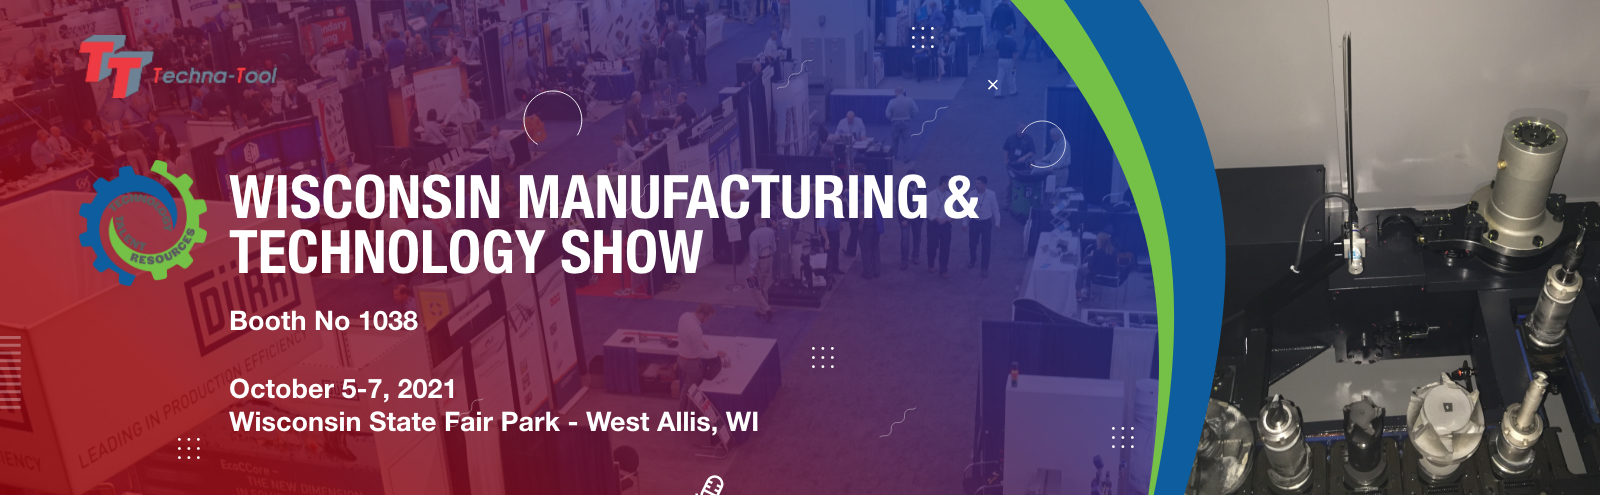 Wisconsin Manufacturing & Technology Show 2021